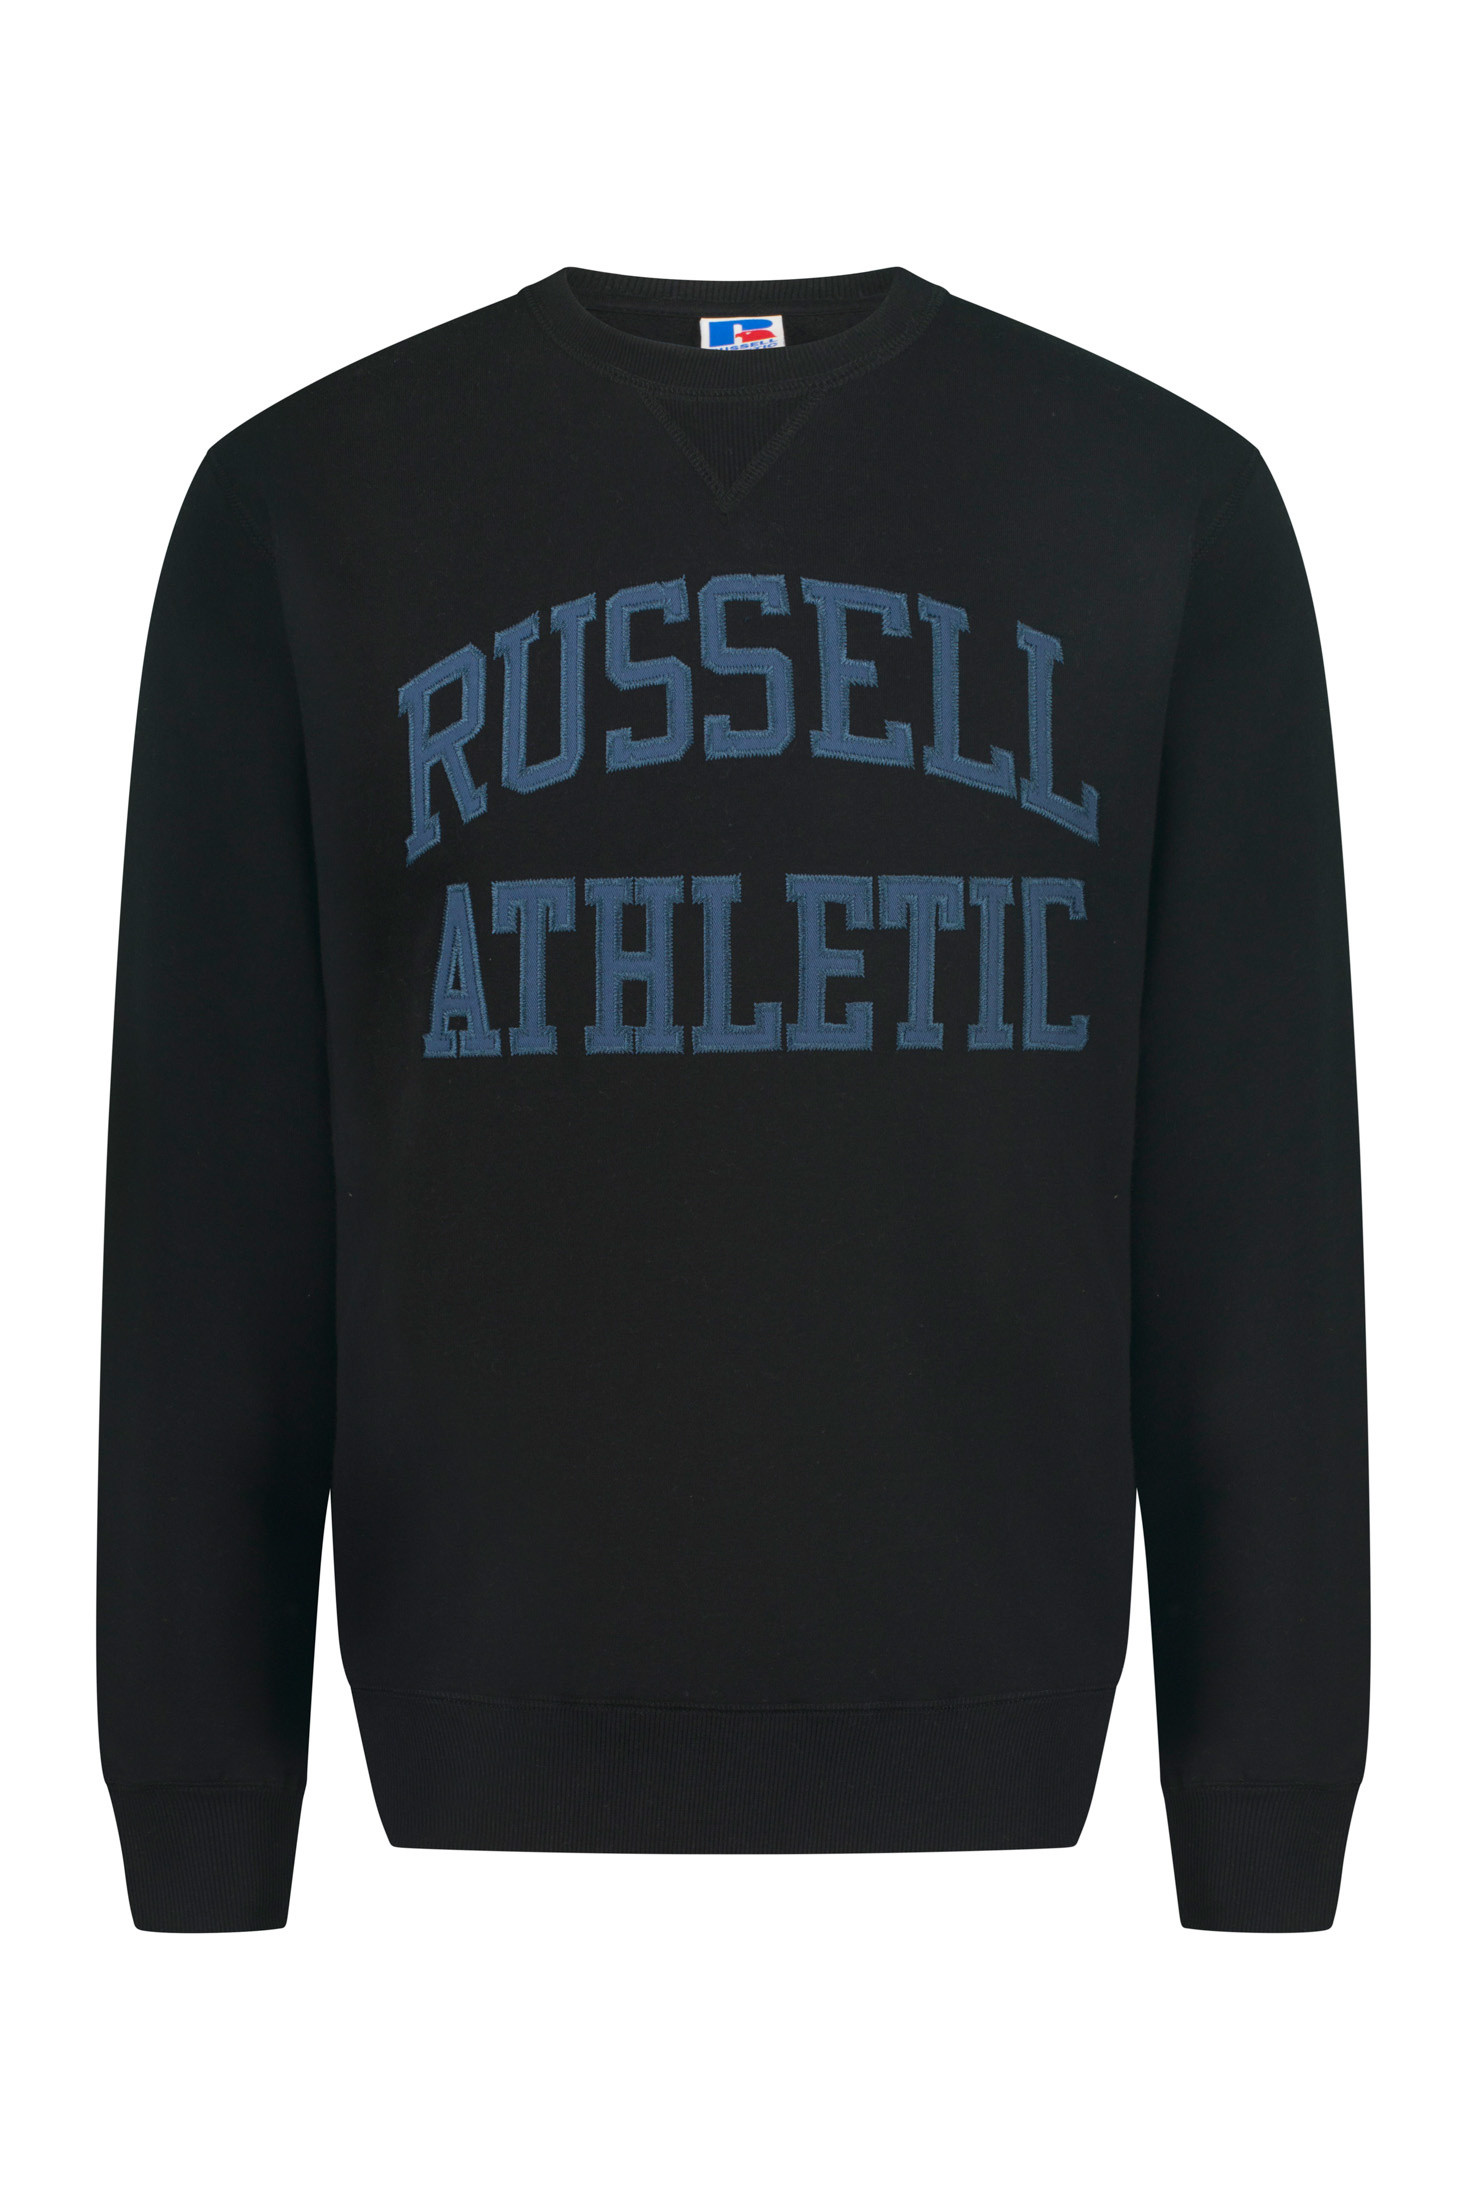 Russell Athletic - Felpa con ricamo, Nero, large image number 0